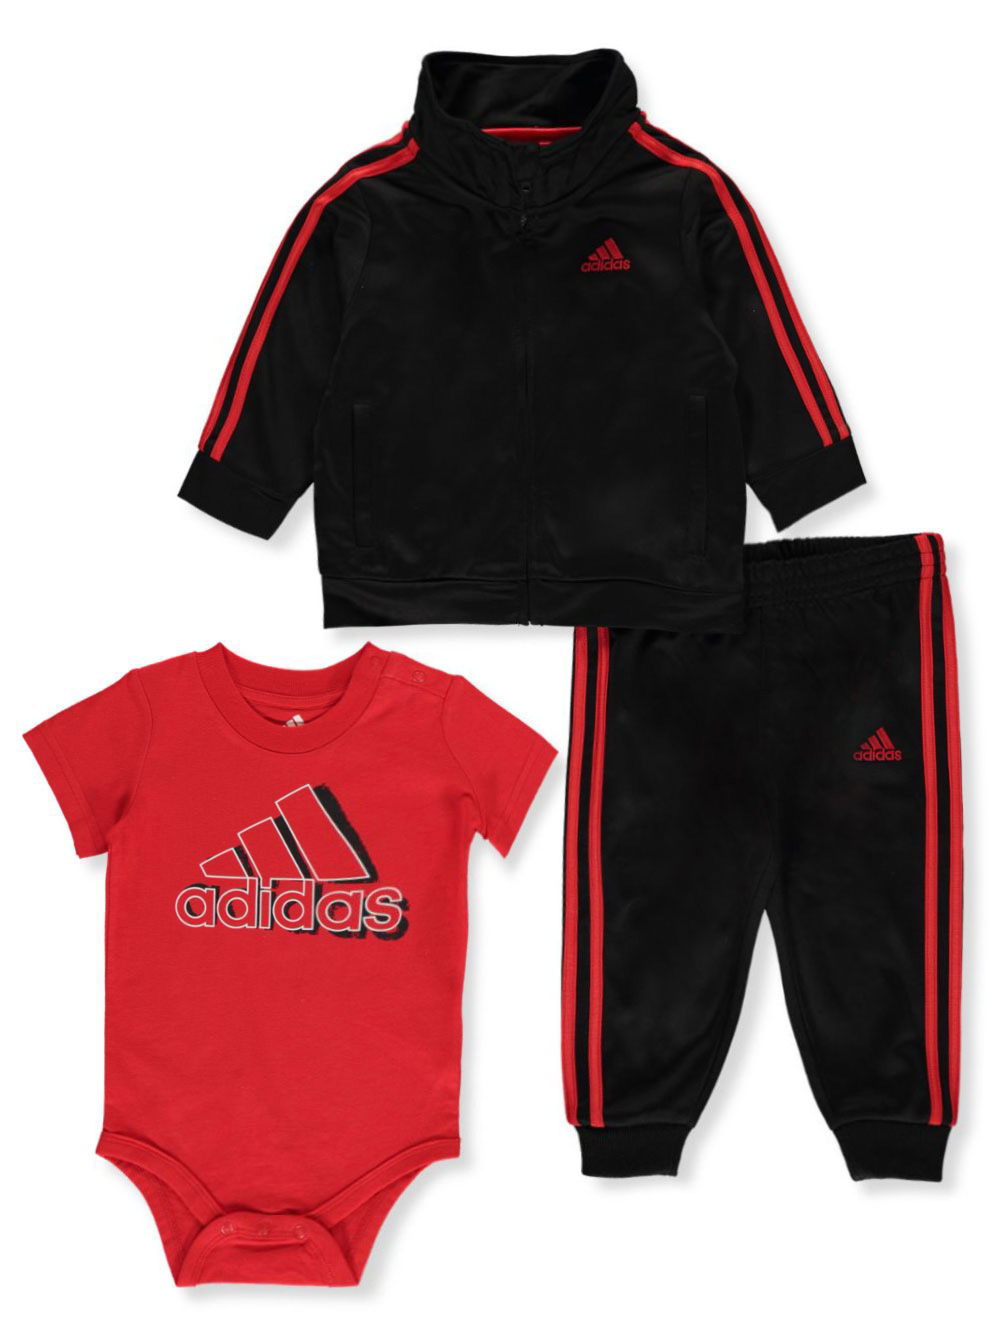 Boys Blue and Black Active Sets